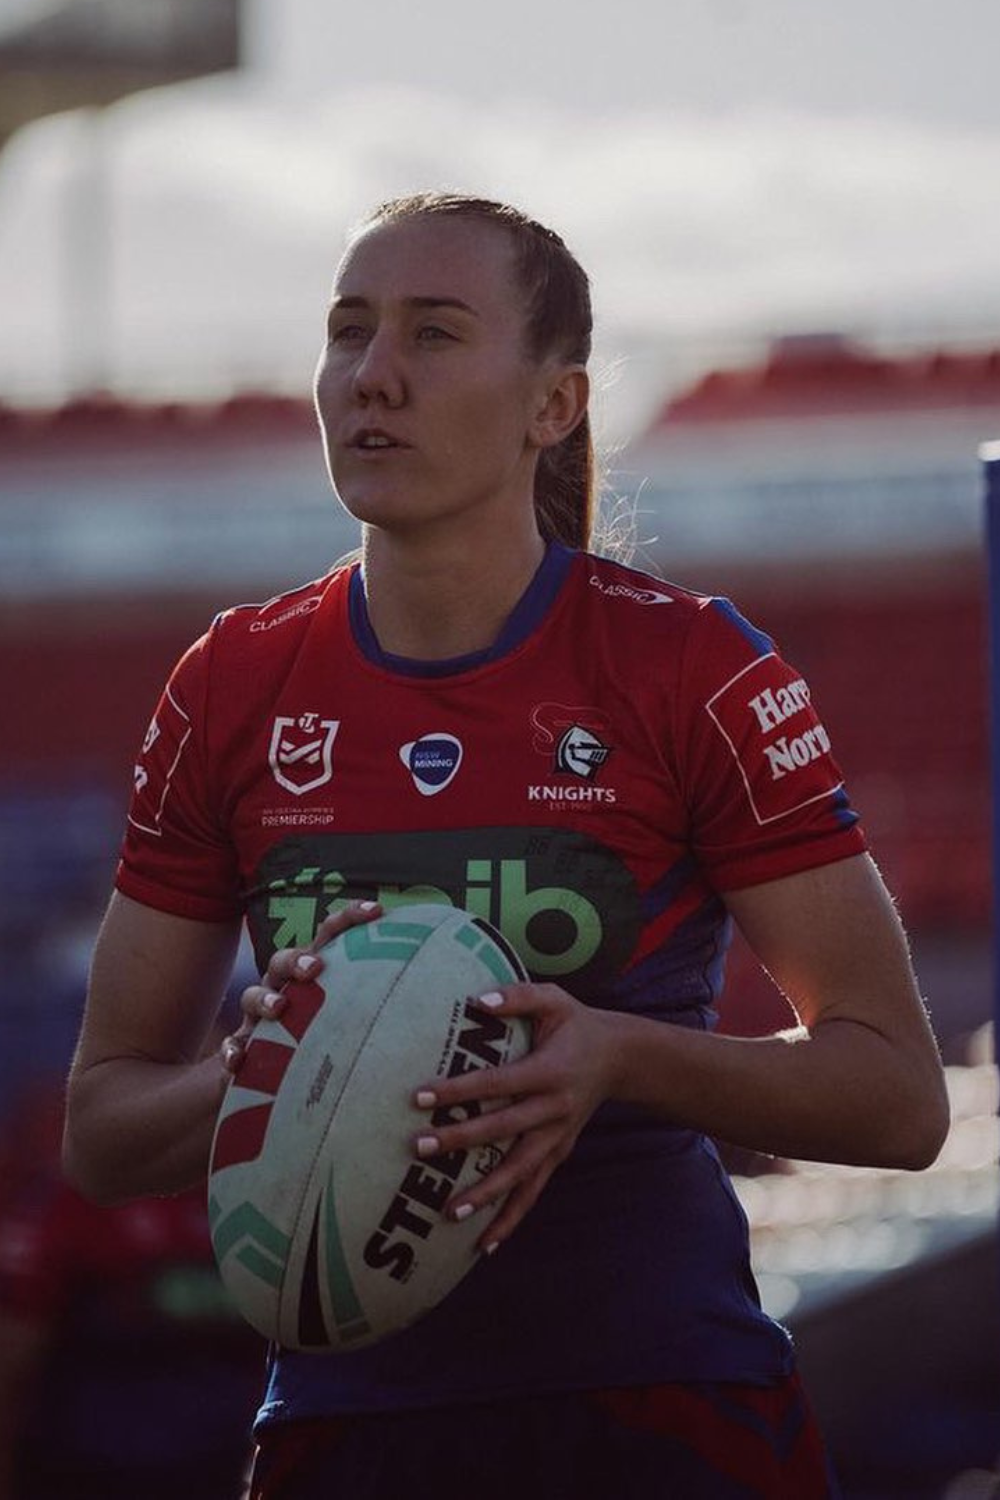 The Australian Professional Rugby League Football Player, Tamika Upton